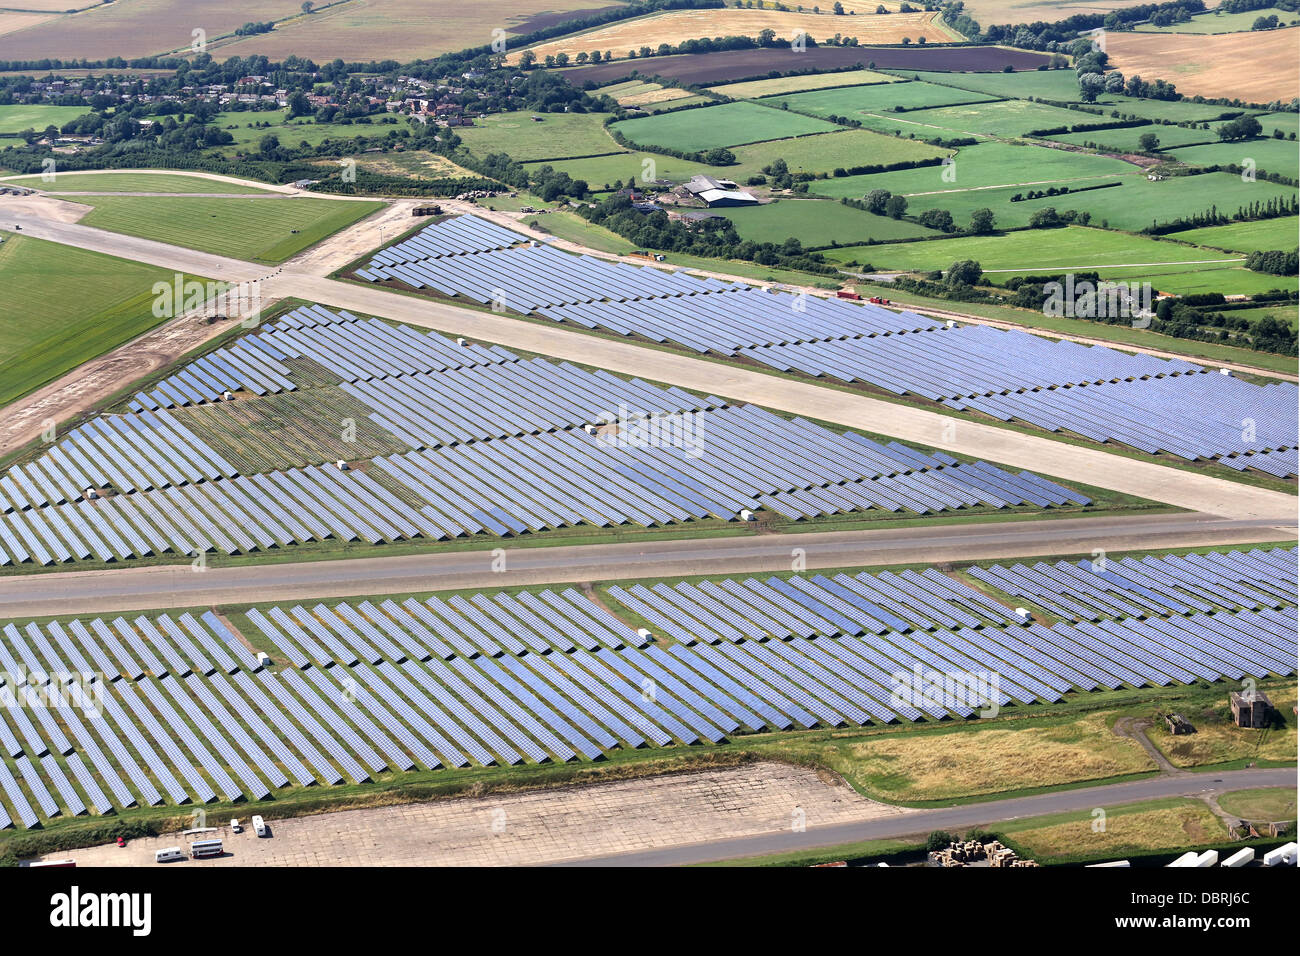 WYMESWOLD AIRFIELD SOLAR FARM WITH MORE THAN 30,000 PANELS, CLAIMED TO BE THE LARGEST IN THE UK. Stock Photo